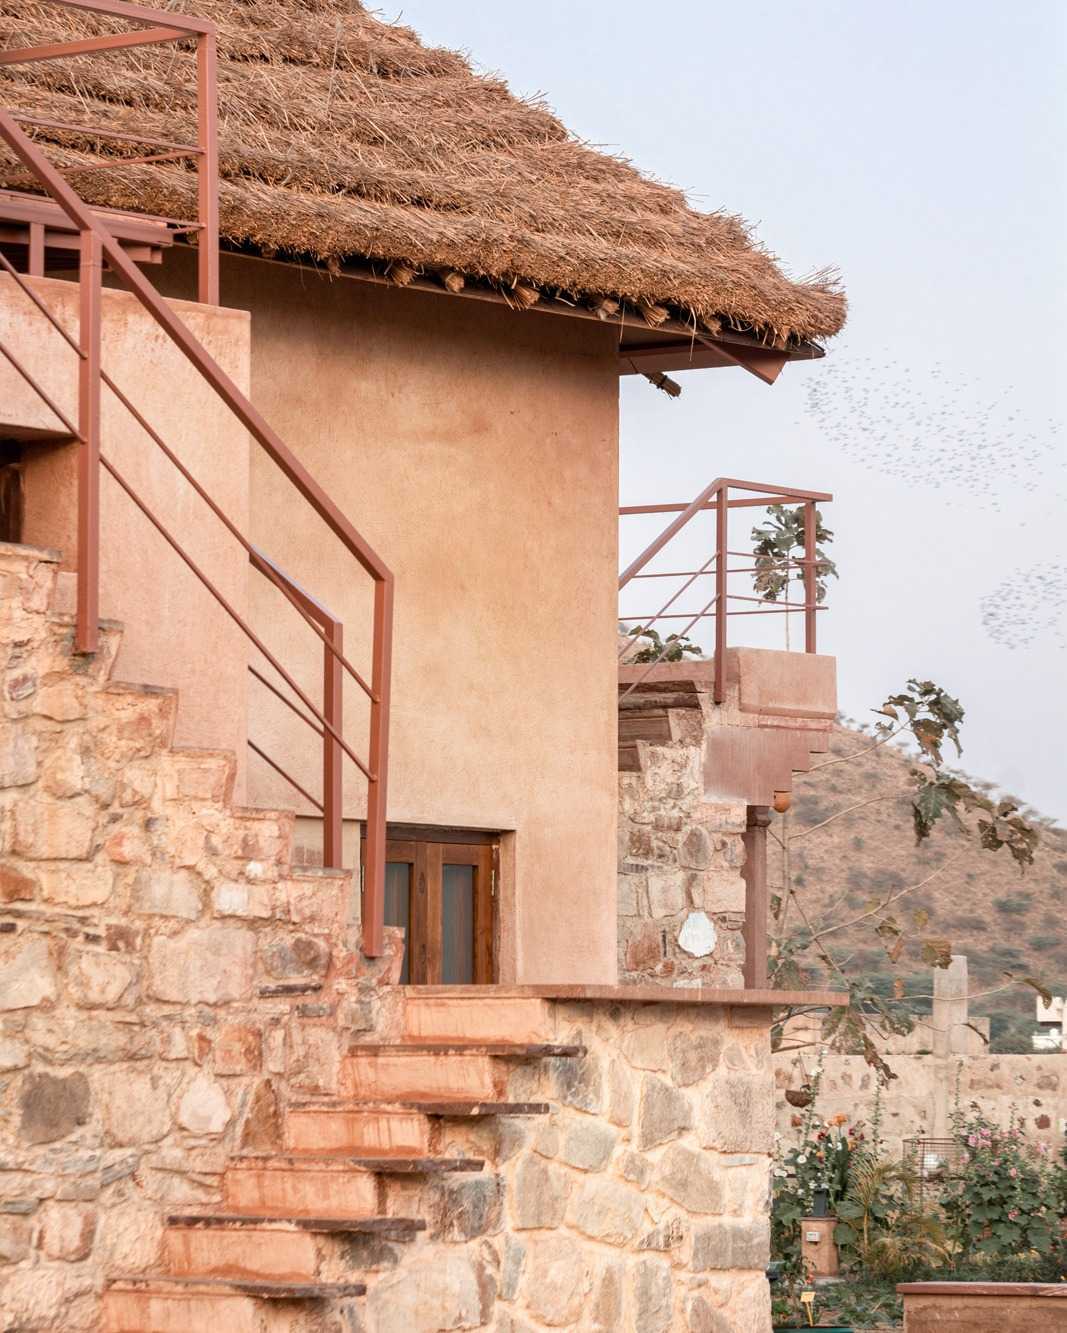 The mud home in Alwar, Rajasthan employs thatch roof so that the house stays cool in summers as thatch is breathable